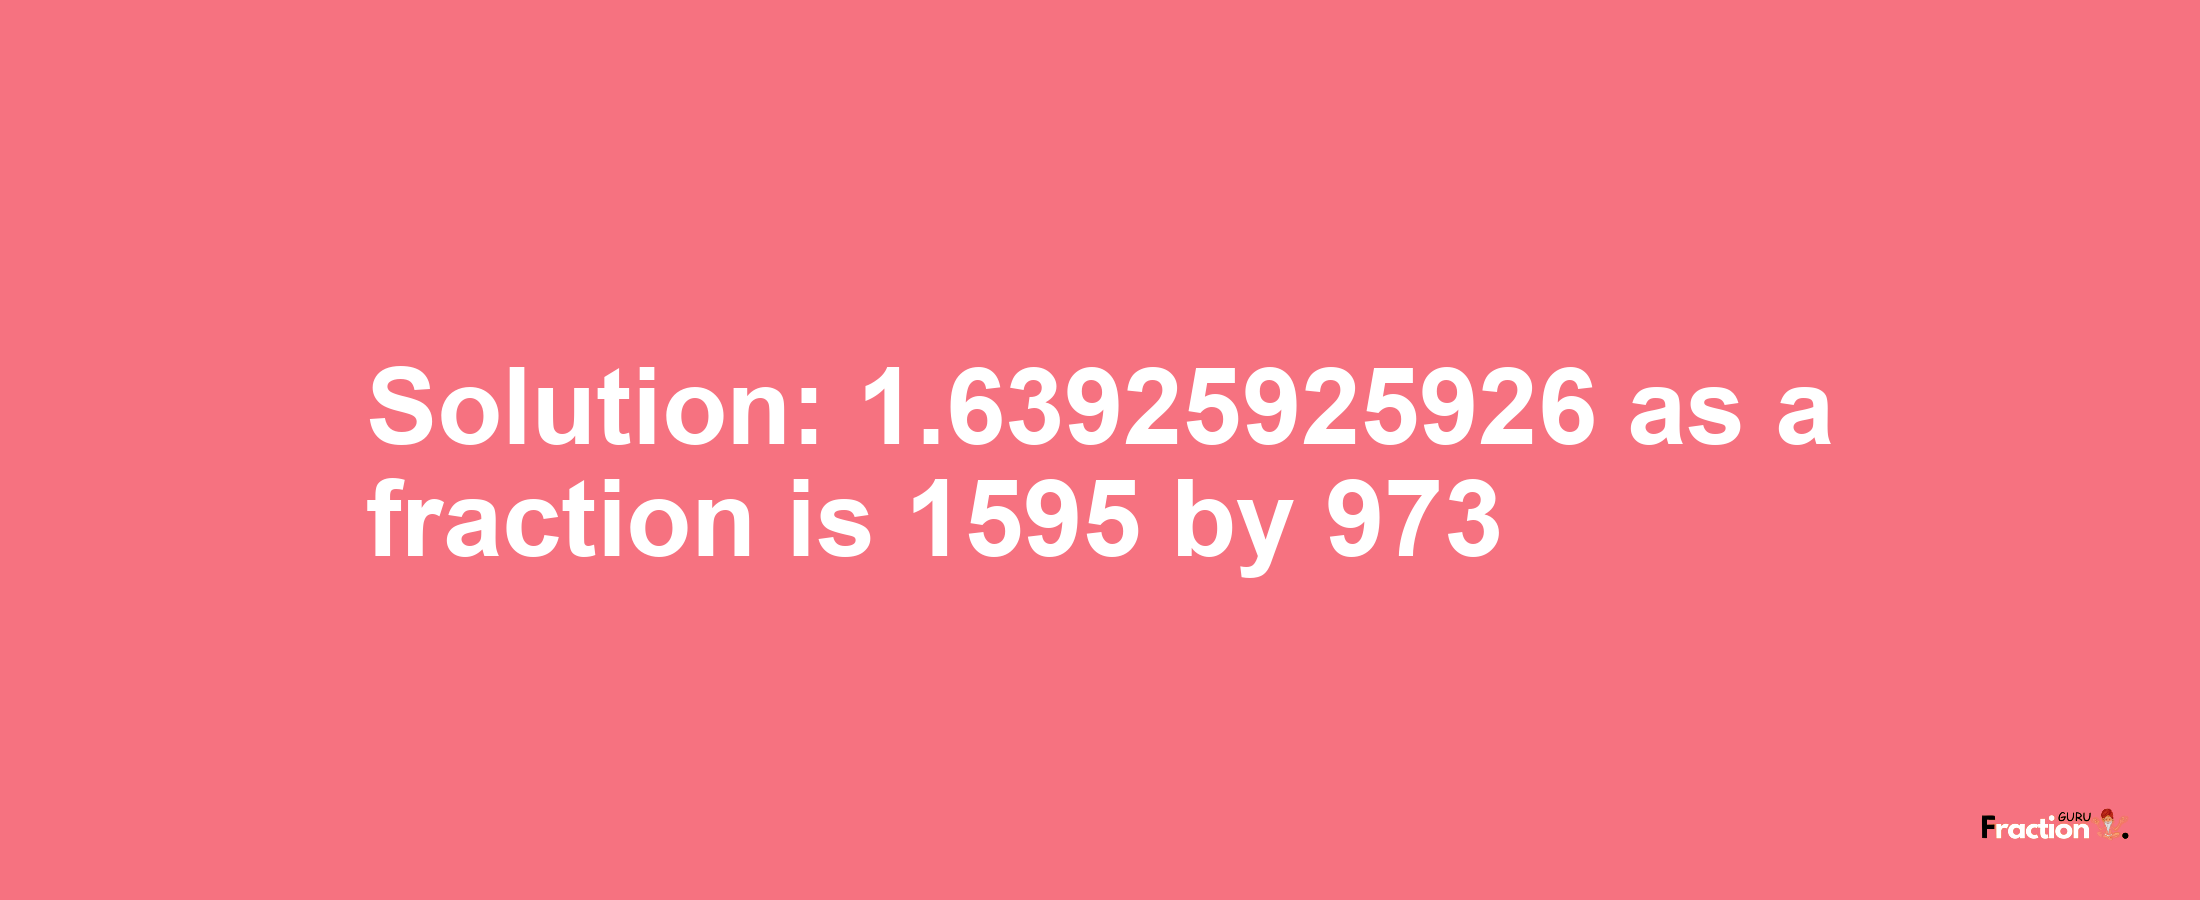 Solution:1.63925925926 as a fraction is 1595/973